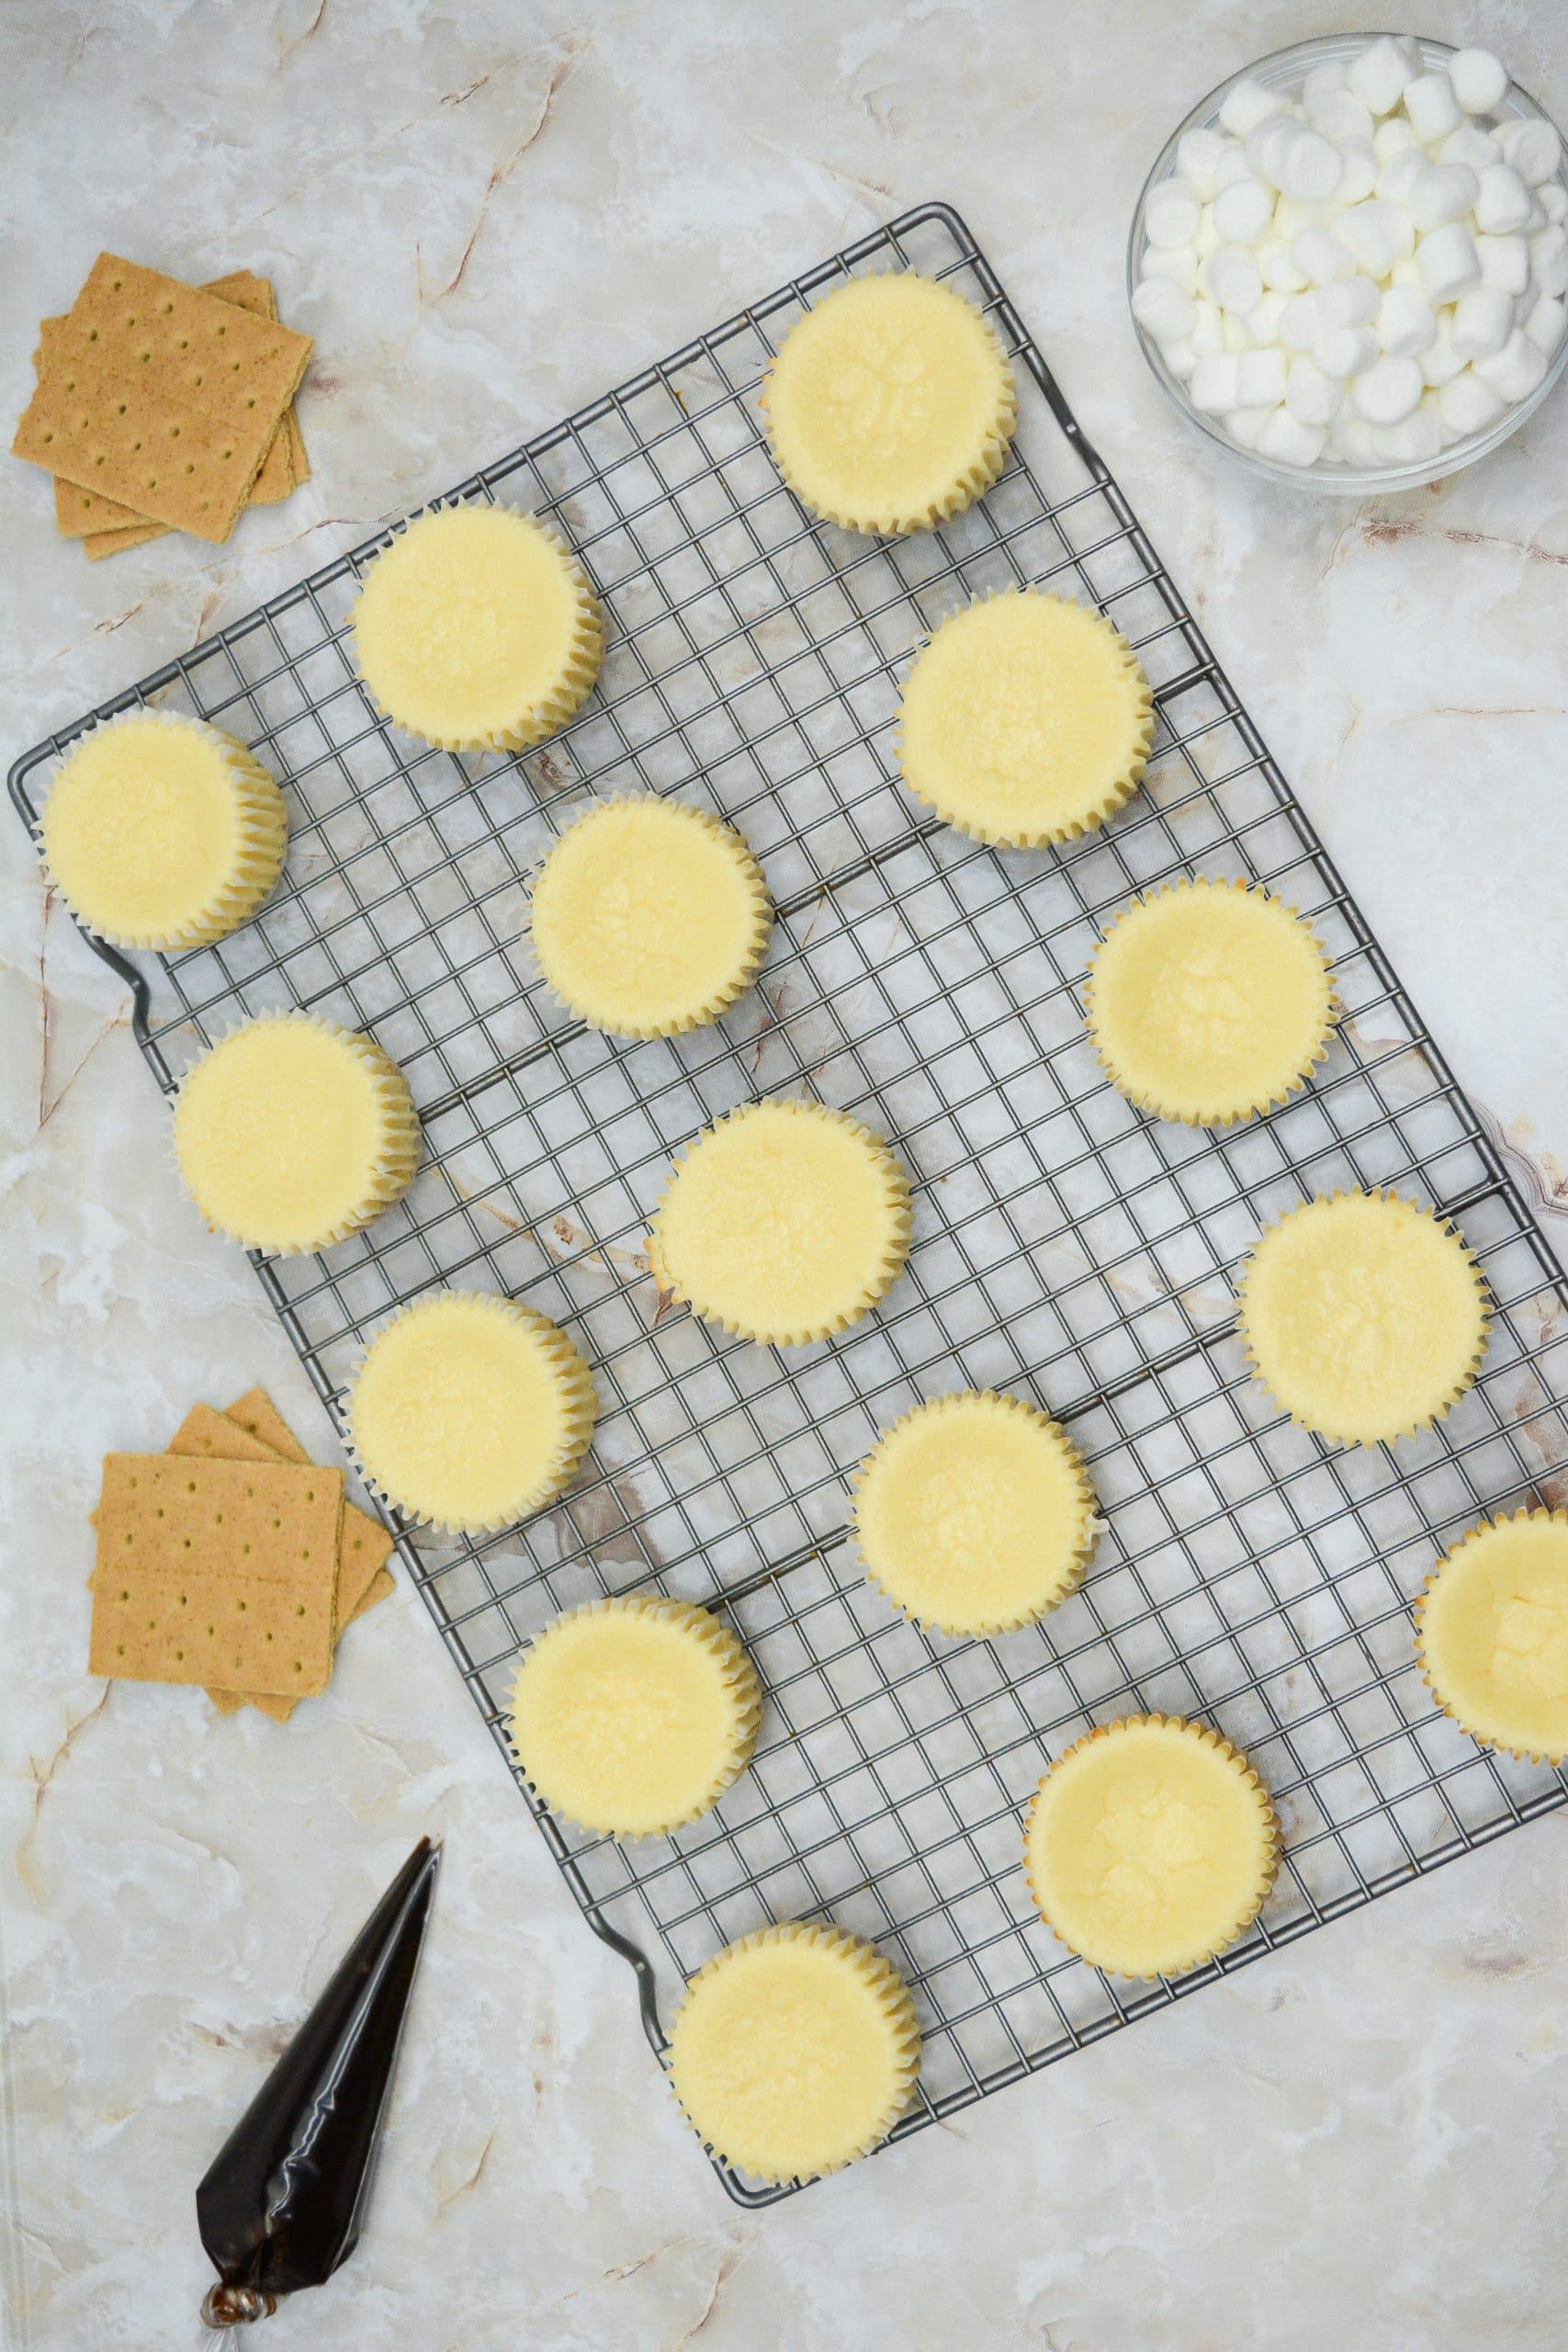 baked mini cheesecakes on a wire cooling rack